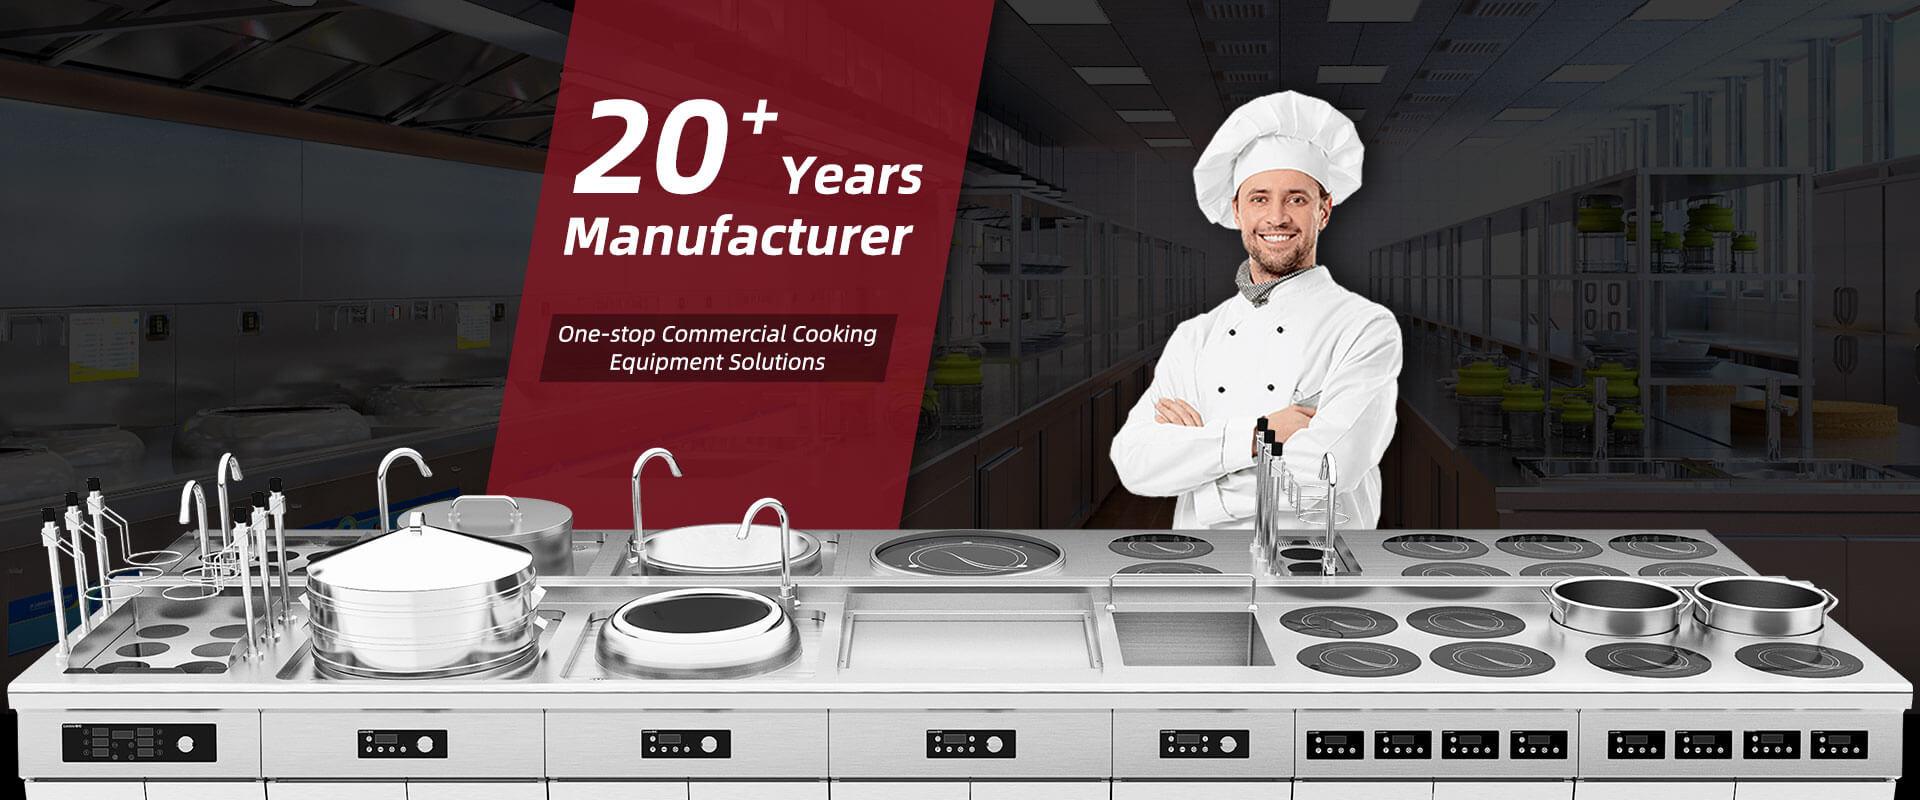 Lestov commercial induction cooker manufacturer - one-stop solutions